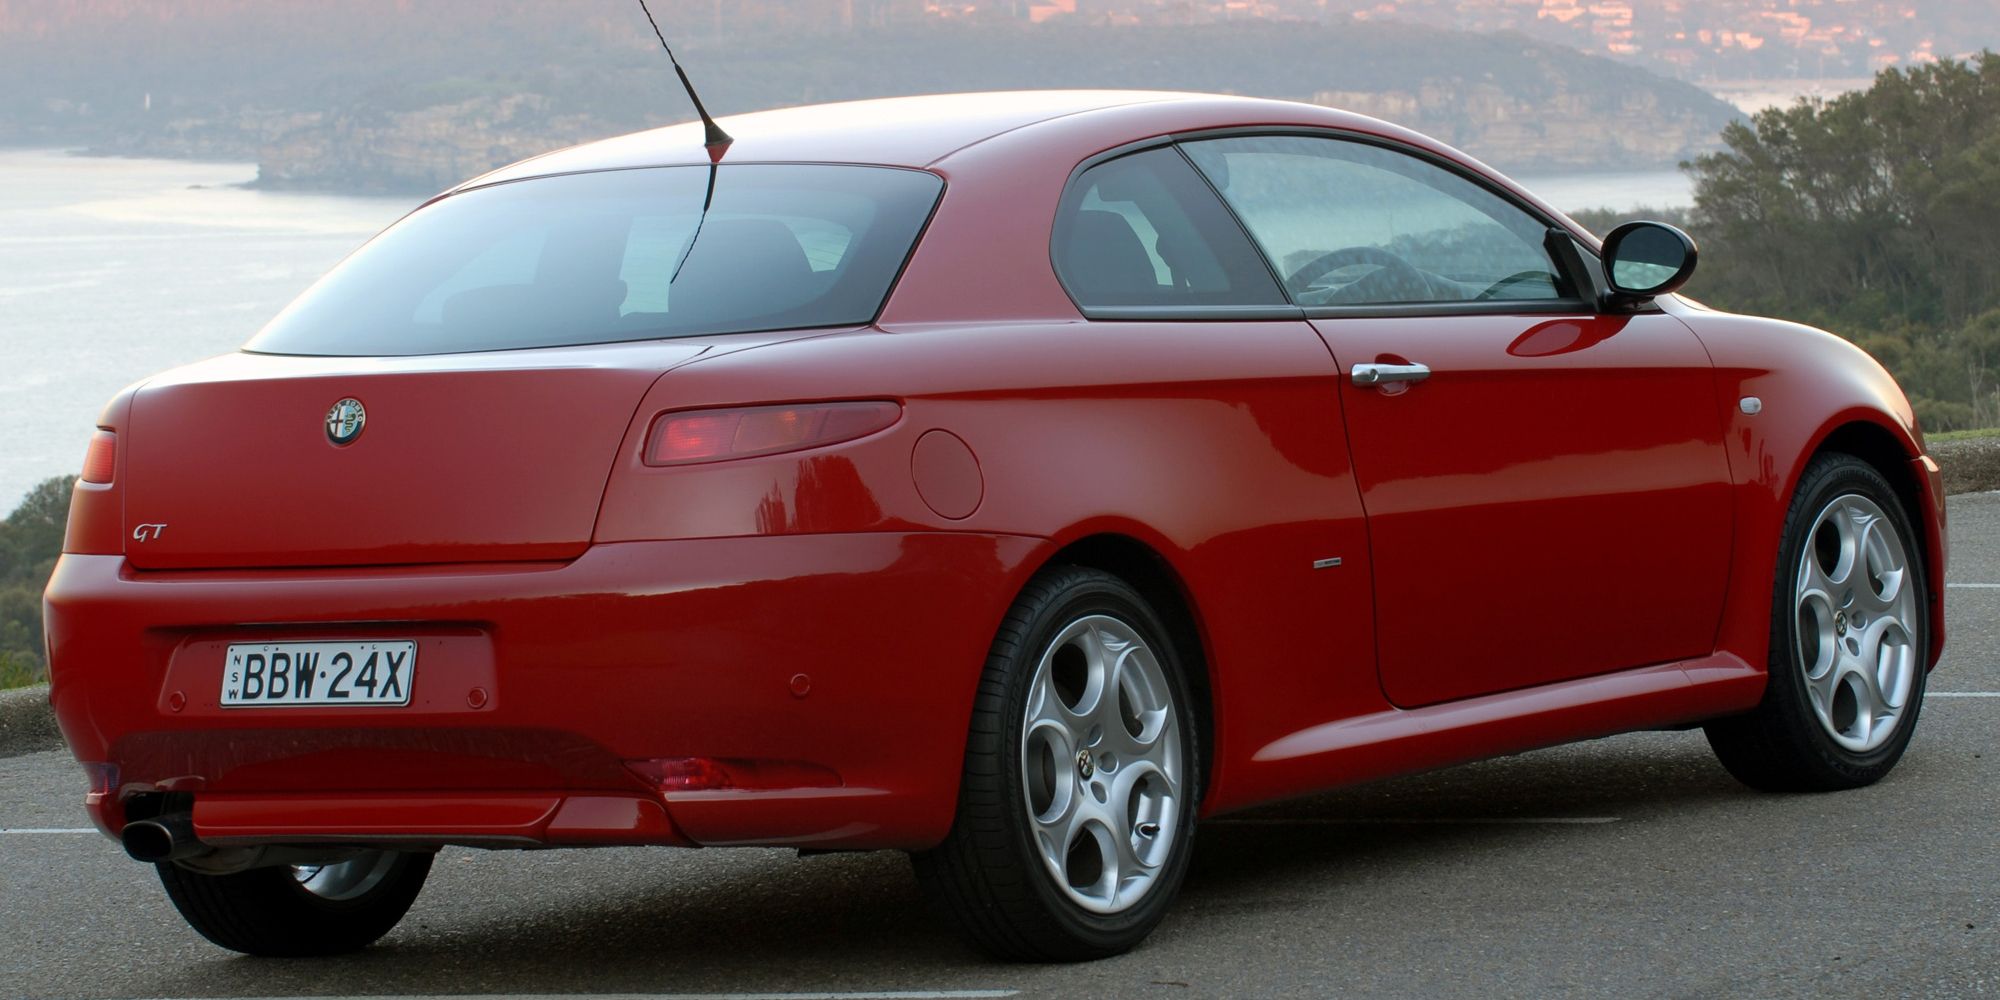 Rear 3/4 view of a red Alfa Romeo GT